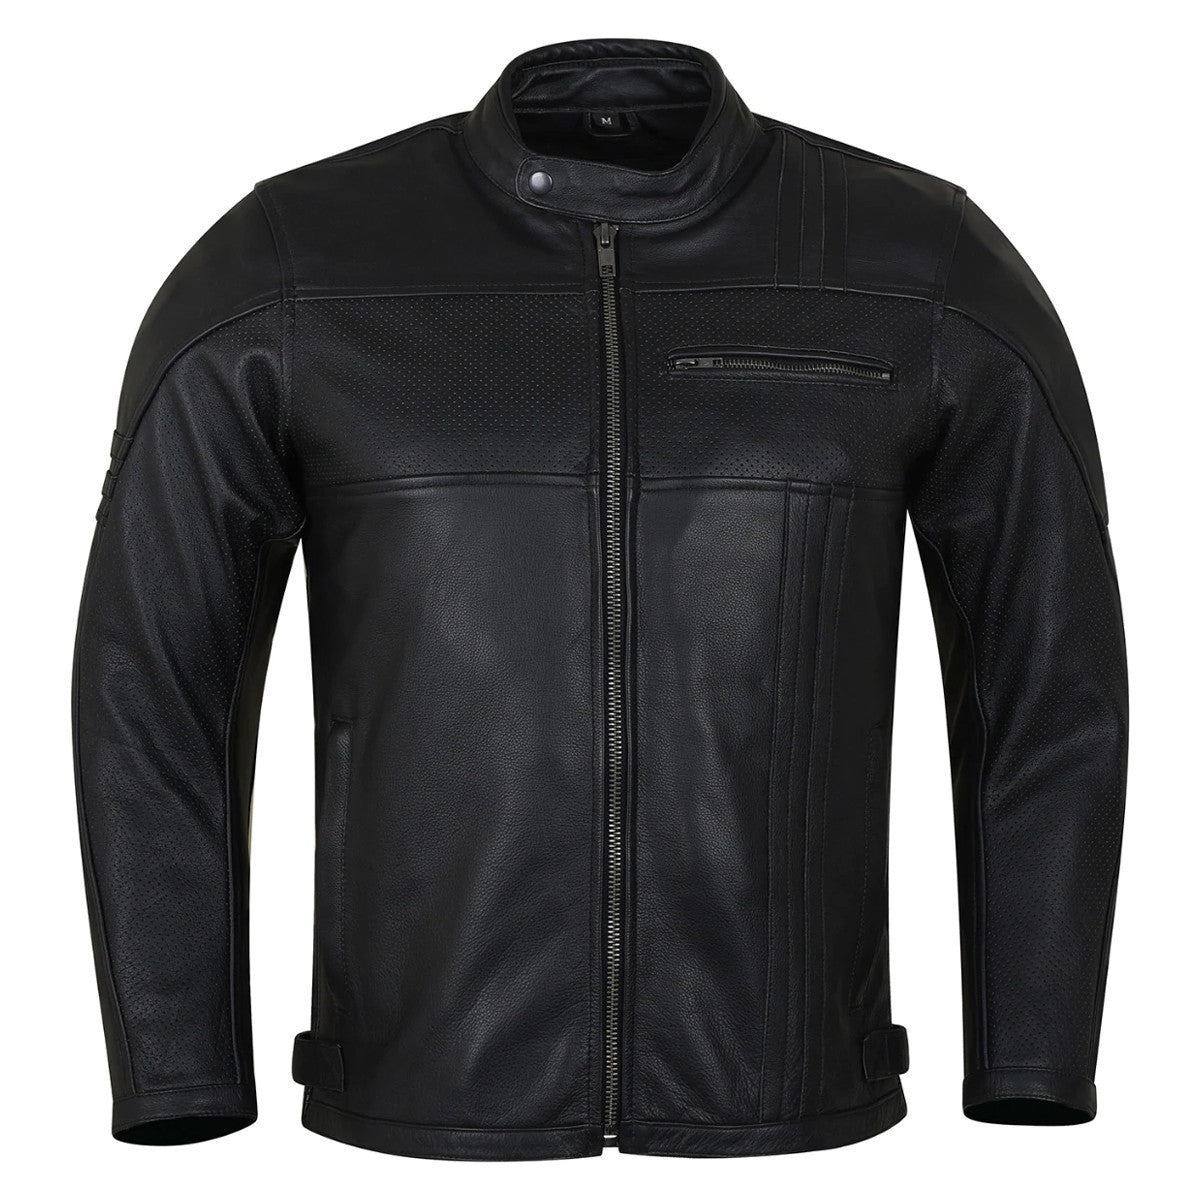 Vance Leather HMM532 Men's Commuter Cafe Racer Motorcycle Leather Jacket with Armor - main